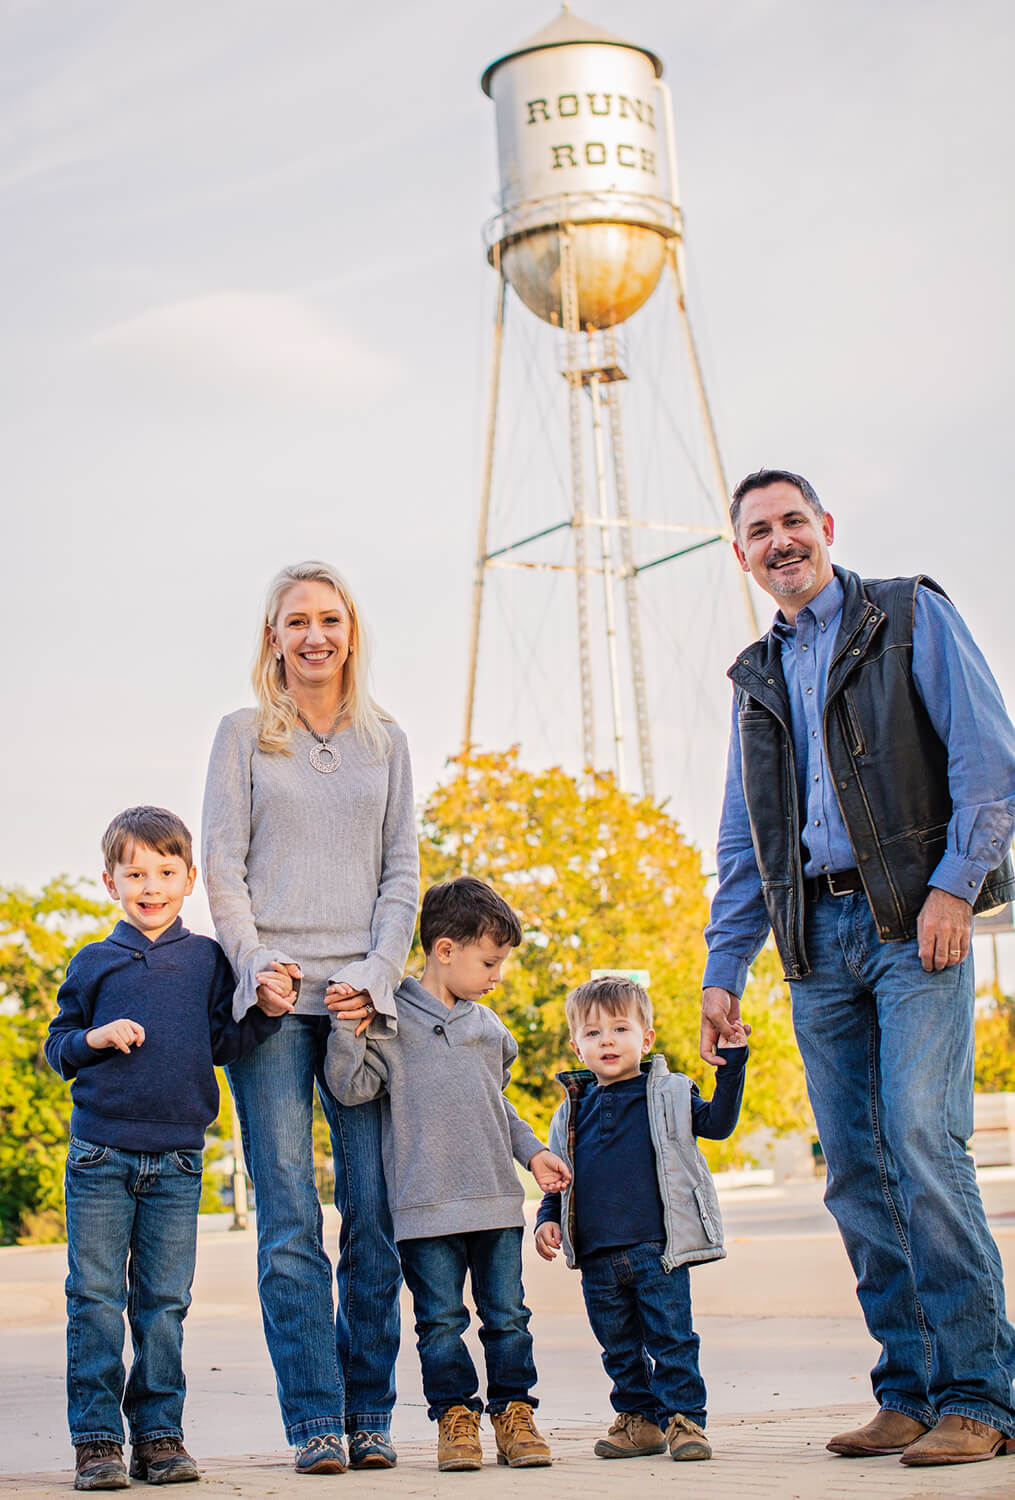 The Bakers in front of the Round Rock water tower